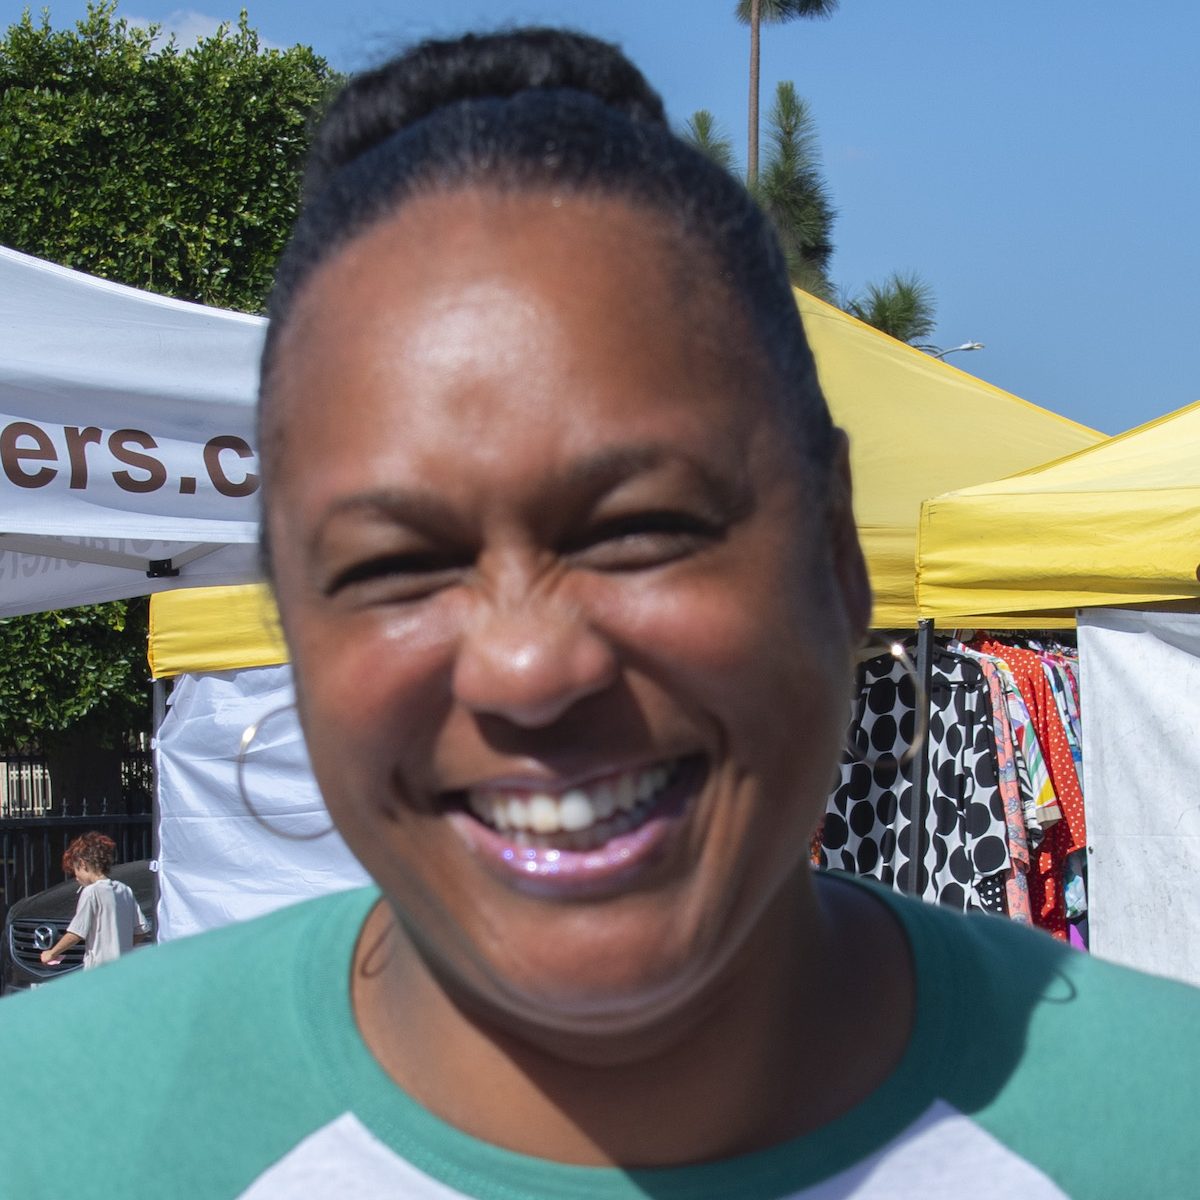 Javonne Sanders, creator of the salad company, "Toss It Up" poses next to her booth at the Wellington Square Farmers Market in South Los Angeles. Photo by Tristan Longwell.